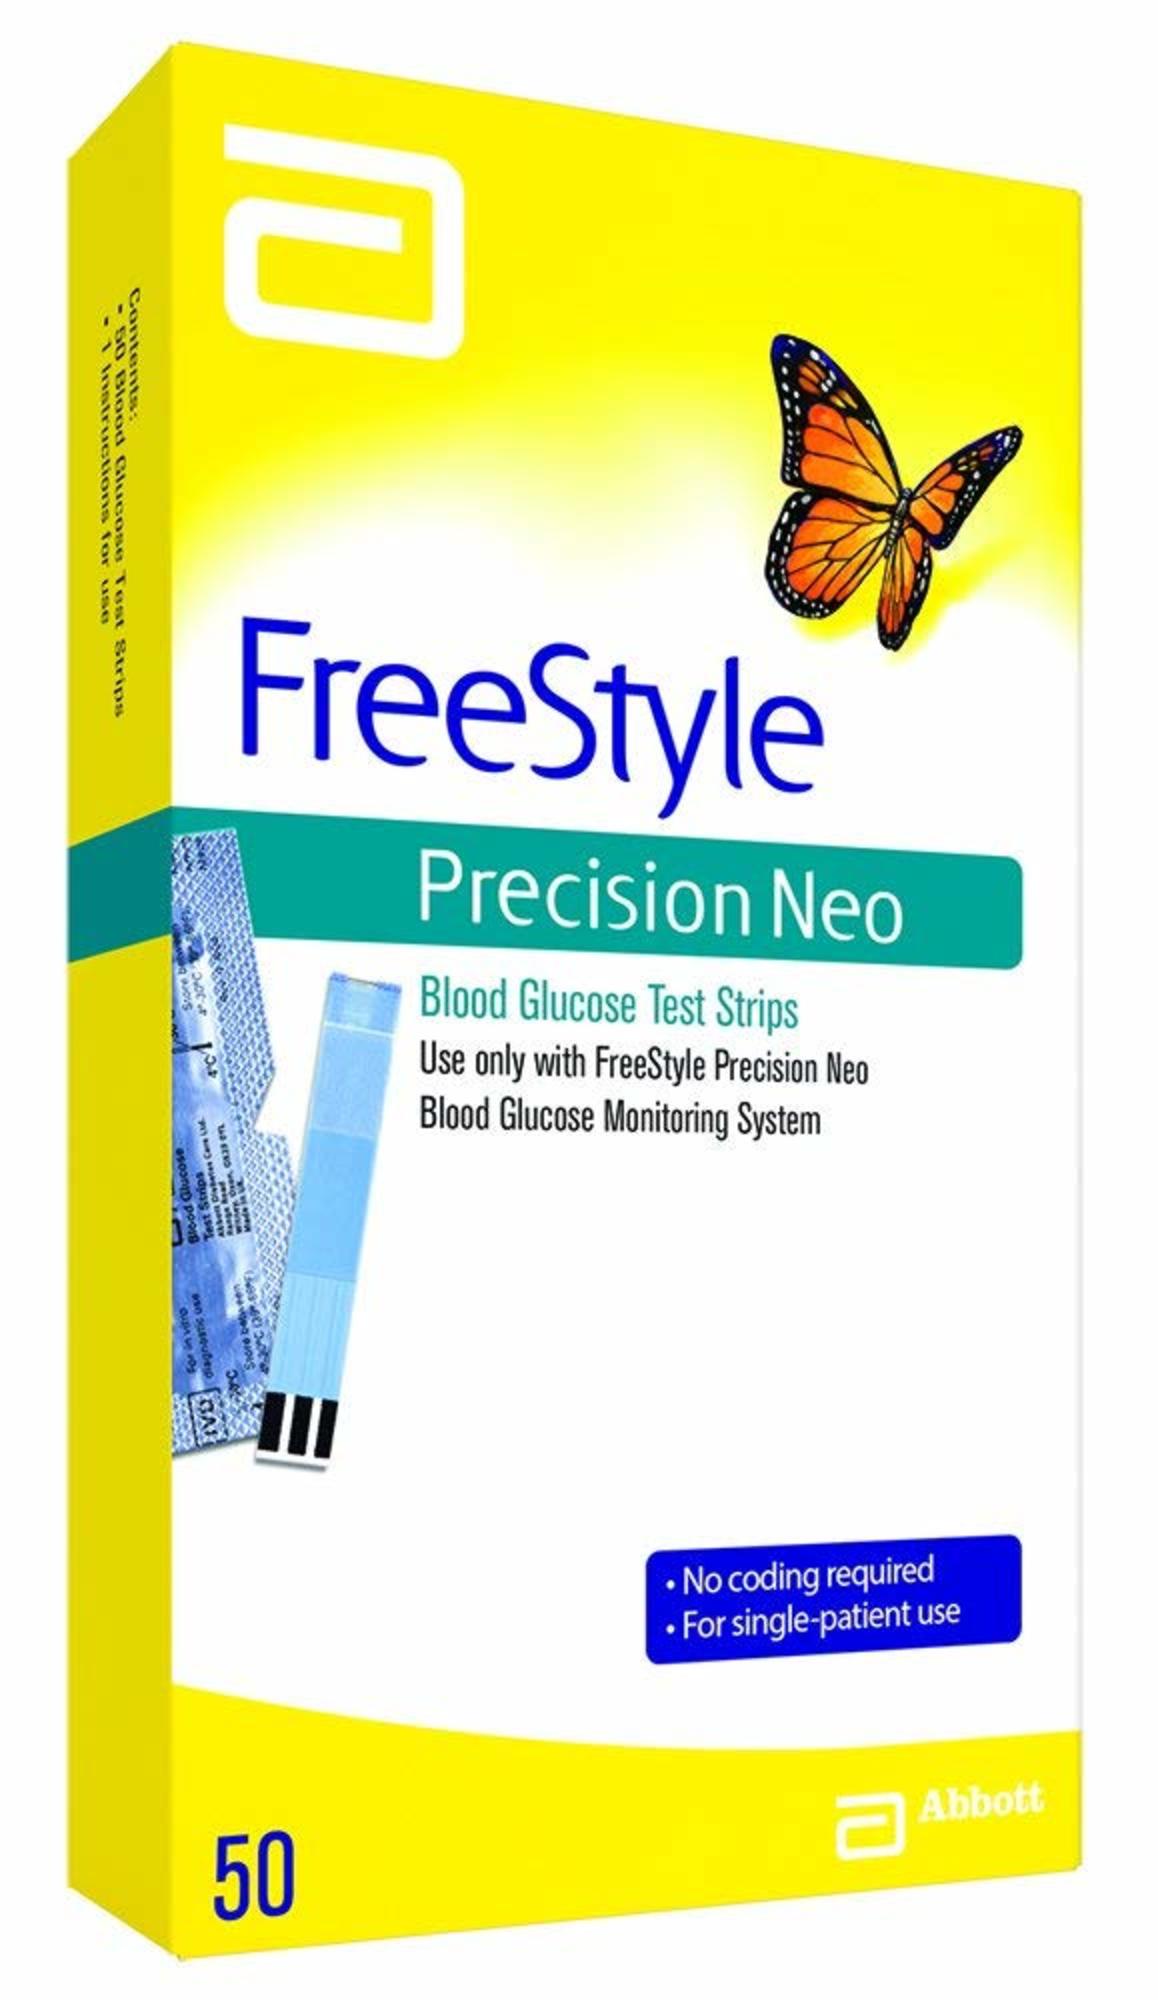 FreeStyle Precision Neo Blood Glucose Test Strips, 50 Count - image 3 of 4